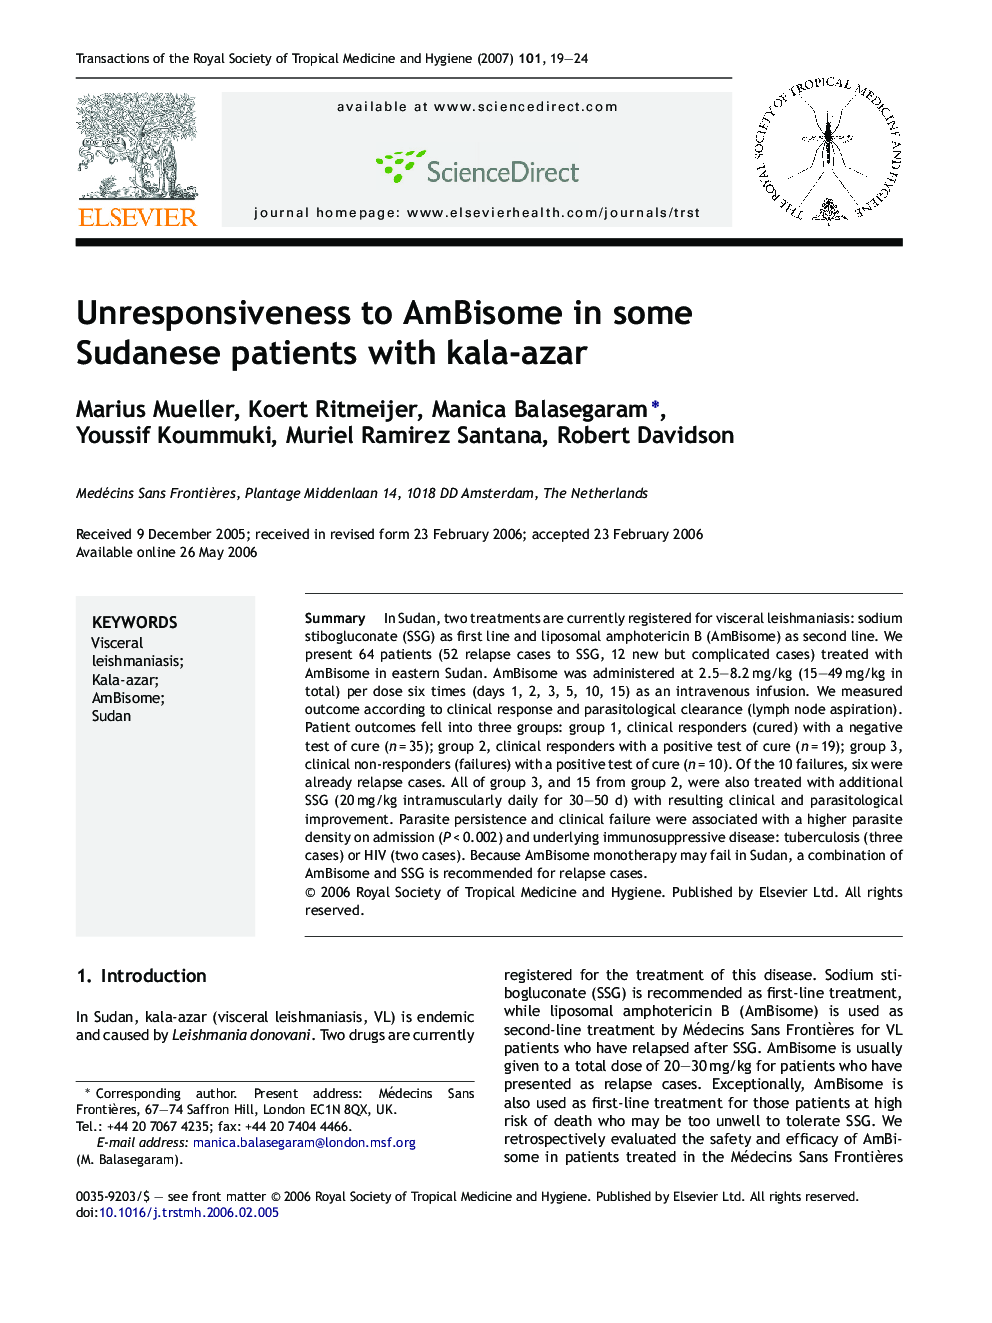 Unresponsiveness to AmBisome in some Sudanese patients with kala-azar